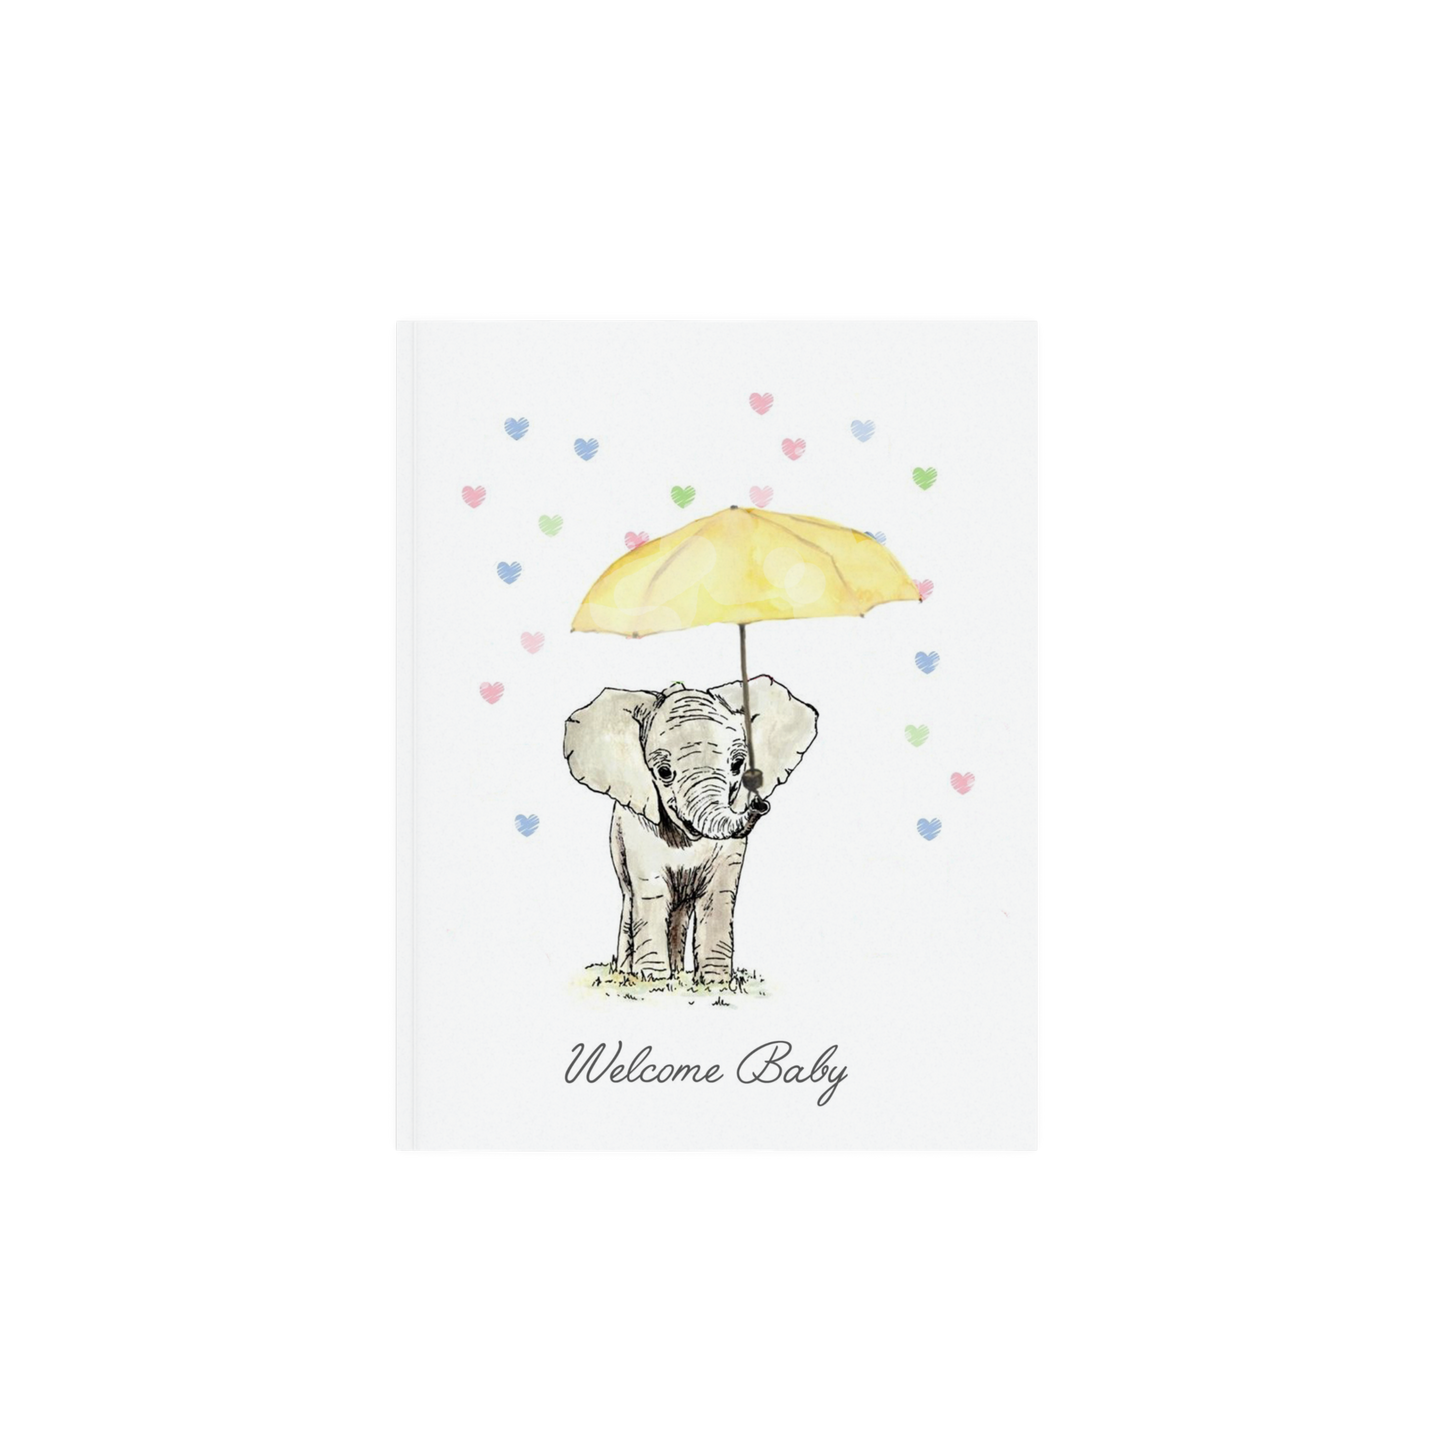 Welcome baby, New baby gift, Nusery decor, Nursery art, Art print, Baby room gallery wall, Infant room decor, Gift for mom to be, Baby gift